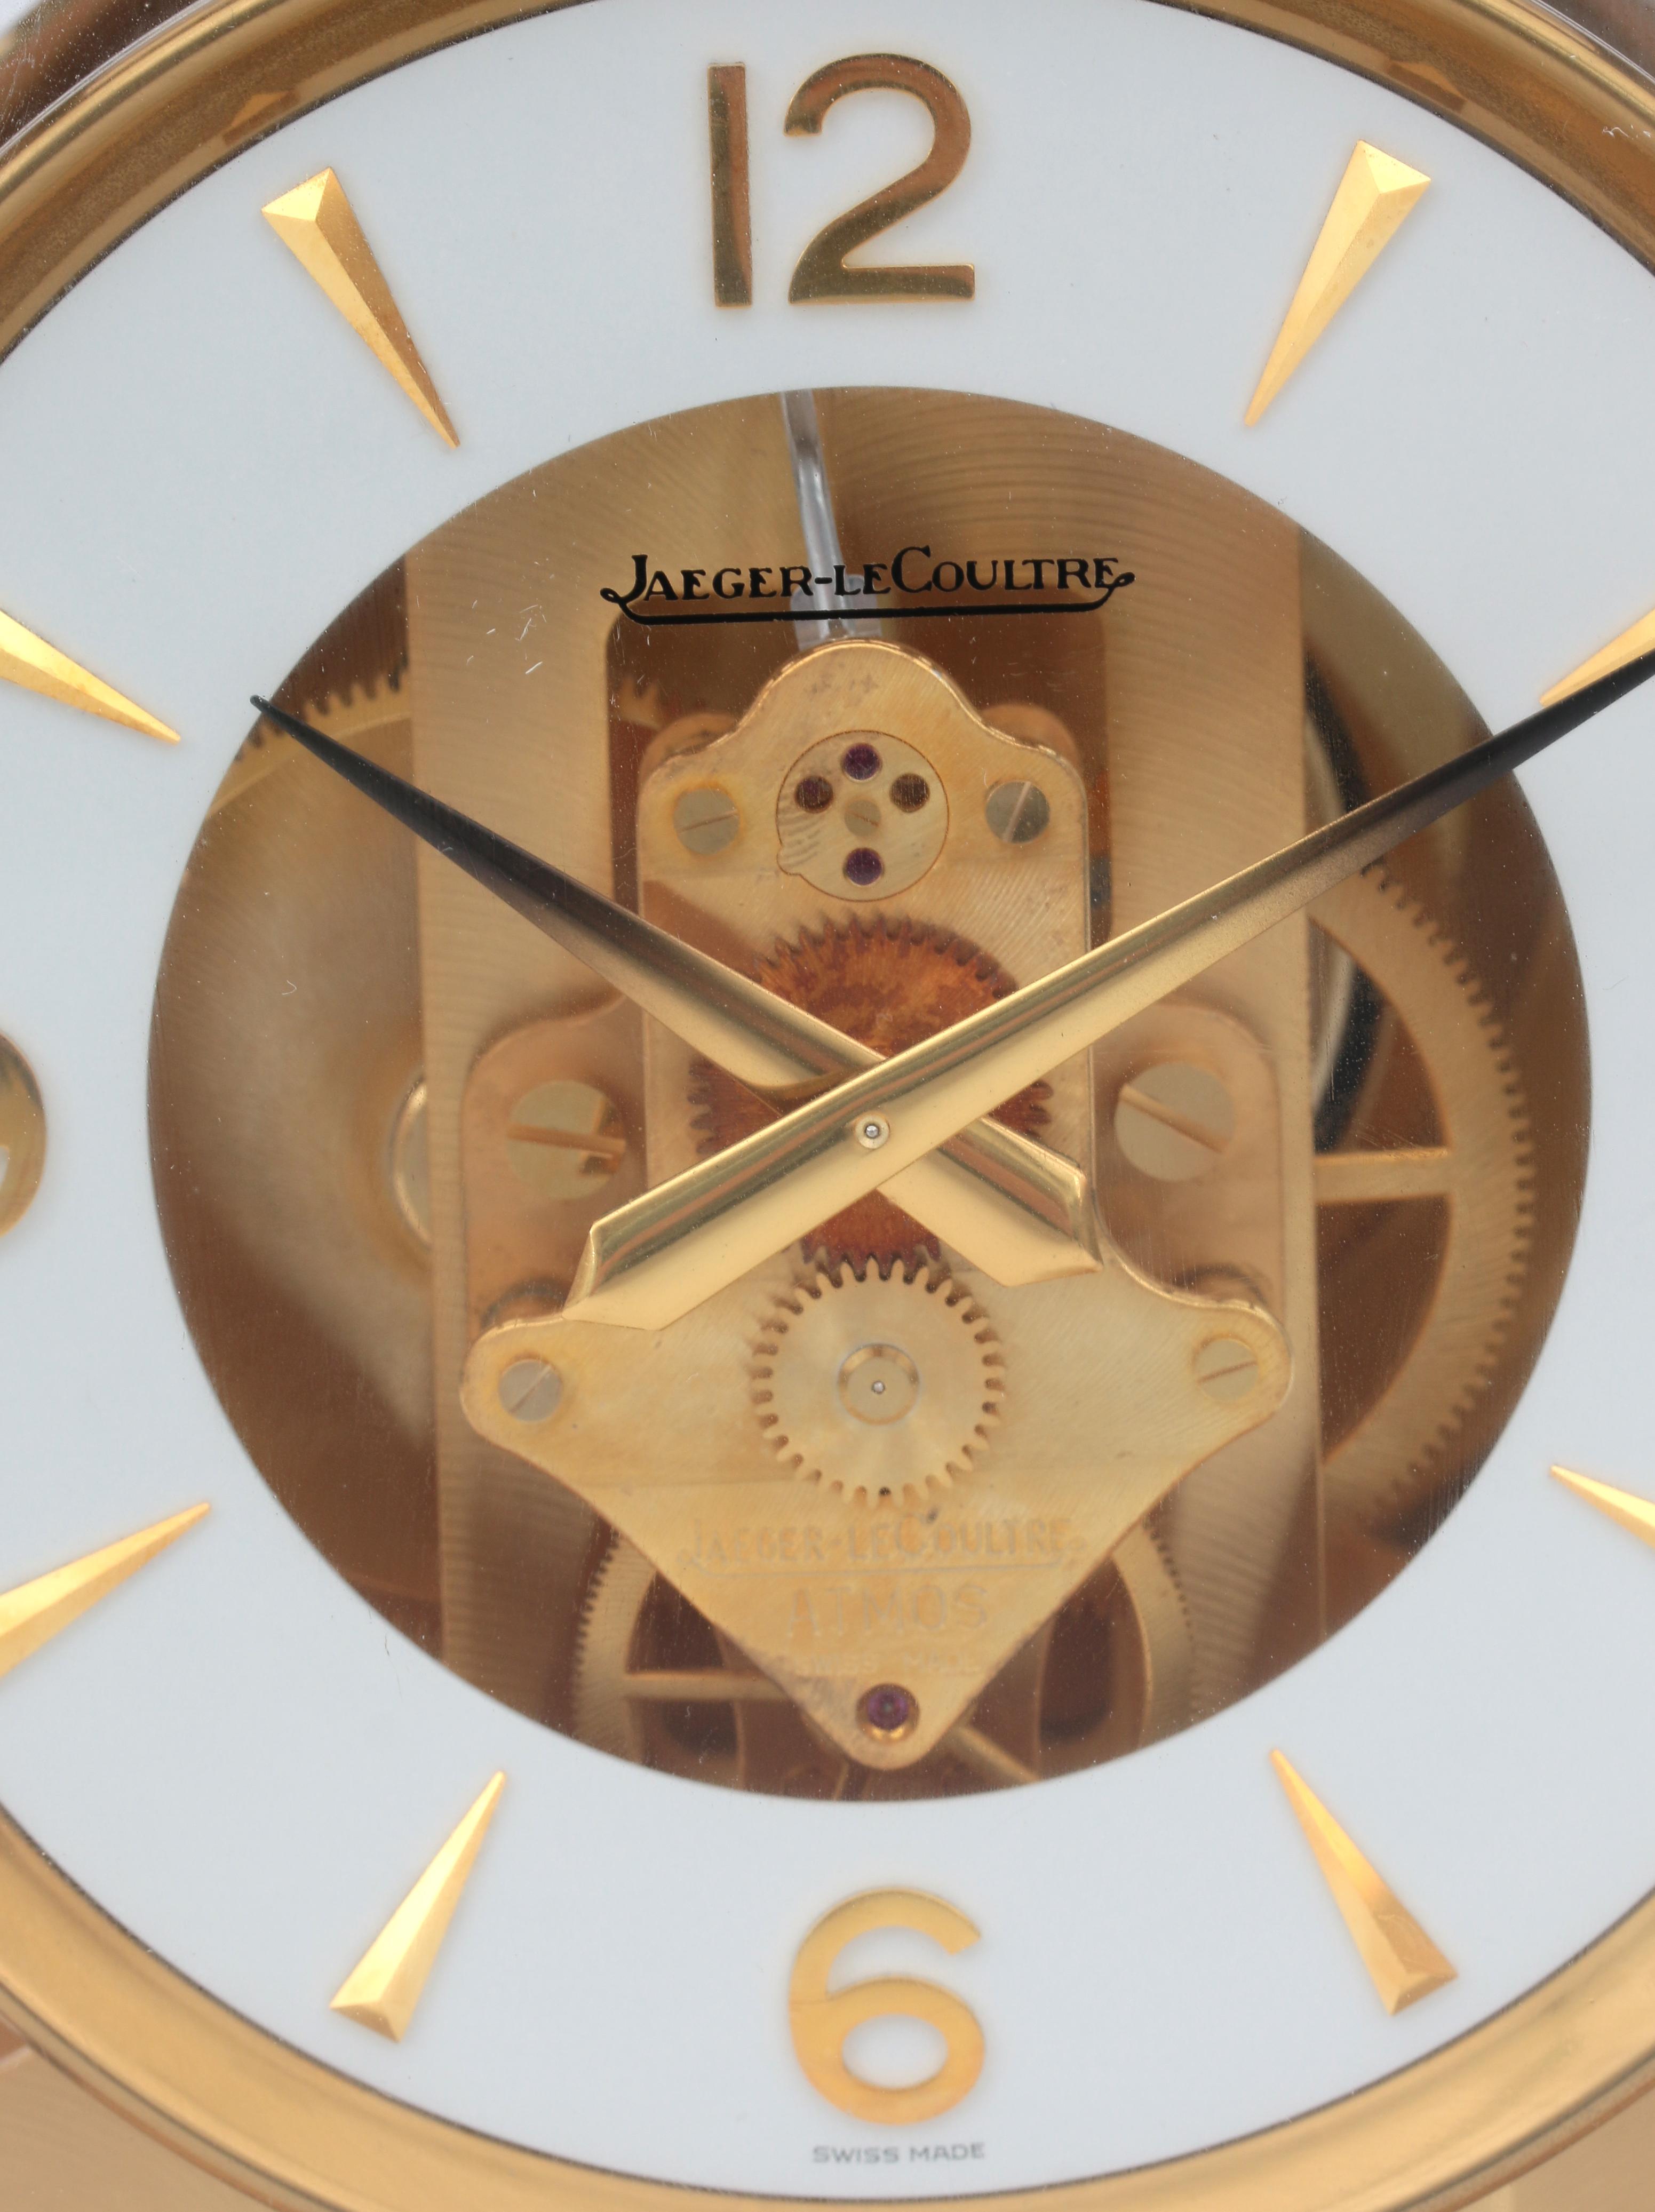 A perpetuum moving clock in gold-plated metal and glass case, Jaeger leCoultre, Swizerland, circa 19 - Image 2 of 5